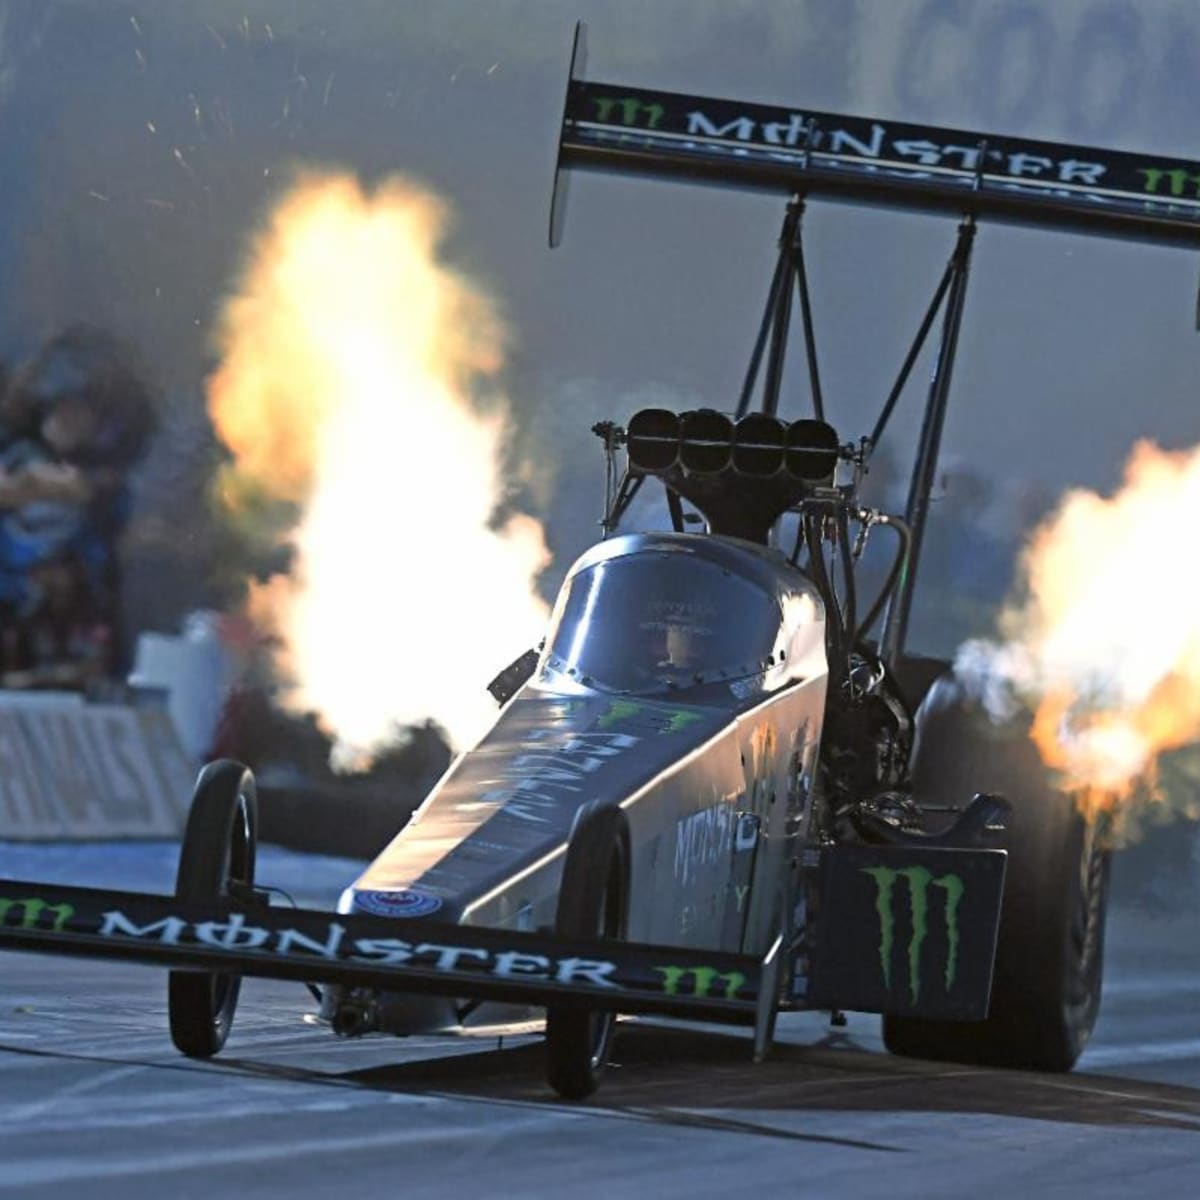 NHRA: Brittany Force re-sets national Top Fuel speed record (see video); is  2nd championship next? - Auto Racing Digest